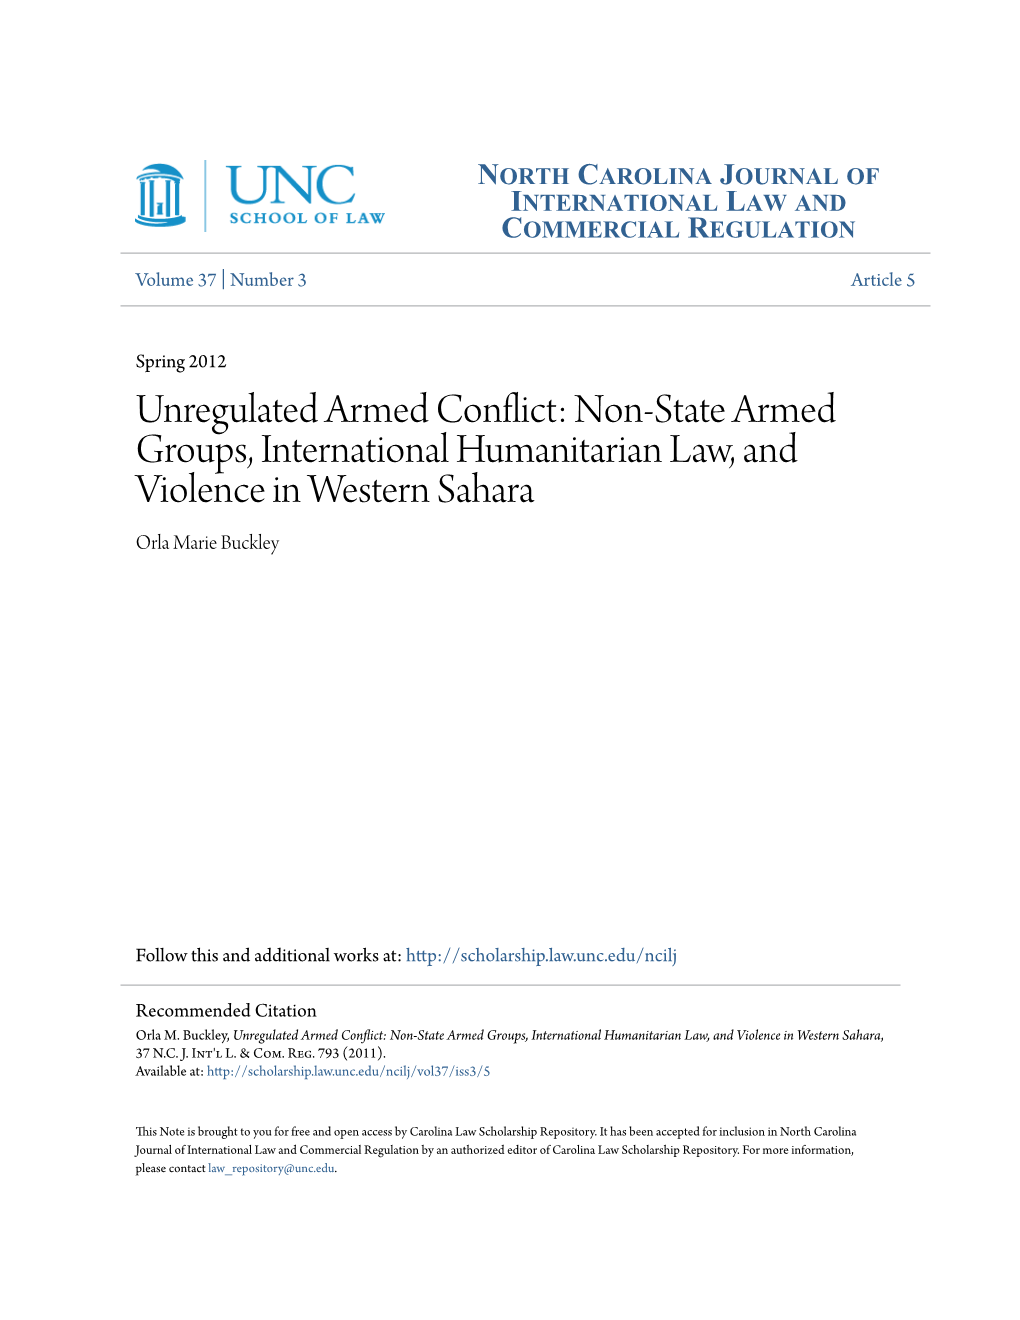 Non-State Armed Groups, International Humanitarian Law, and Violence in Western Sahara Orla Marie Buckley